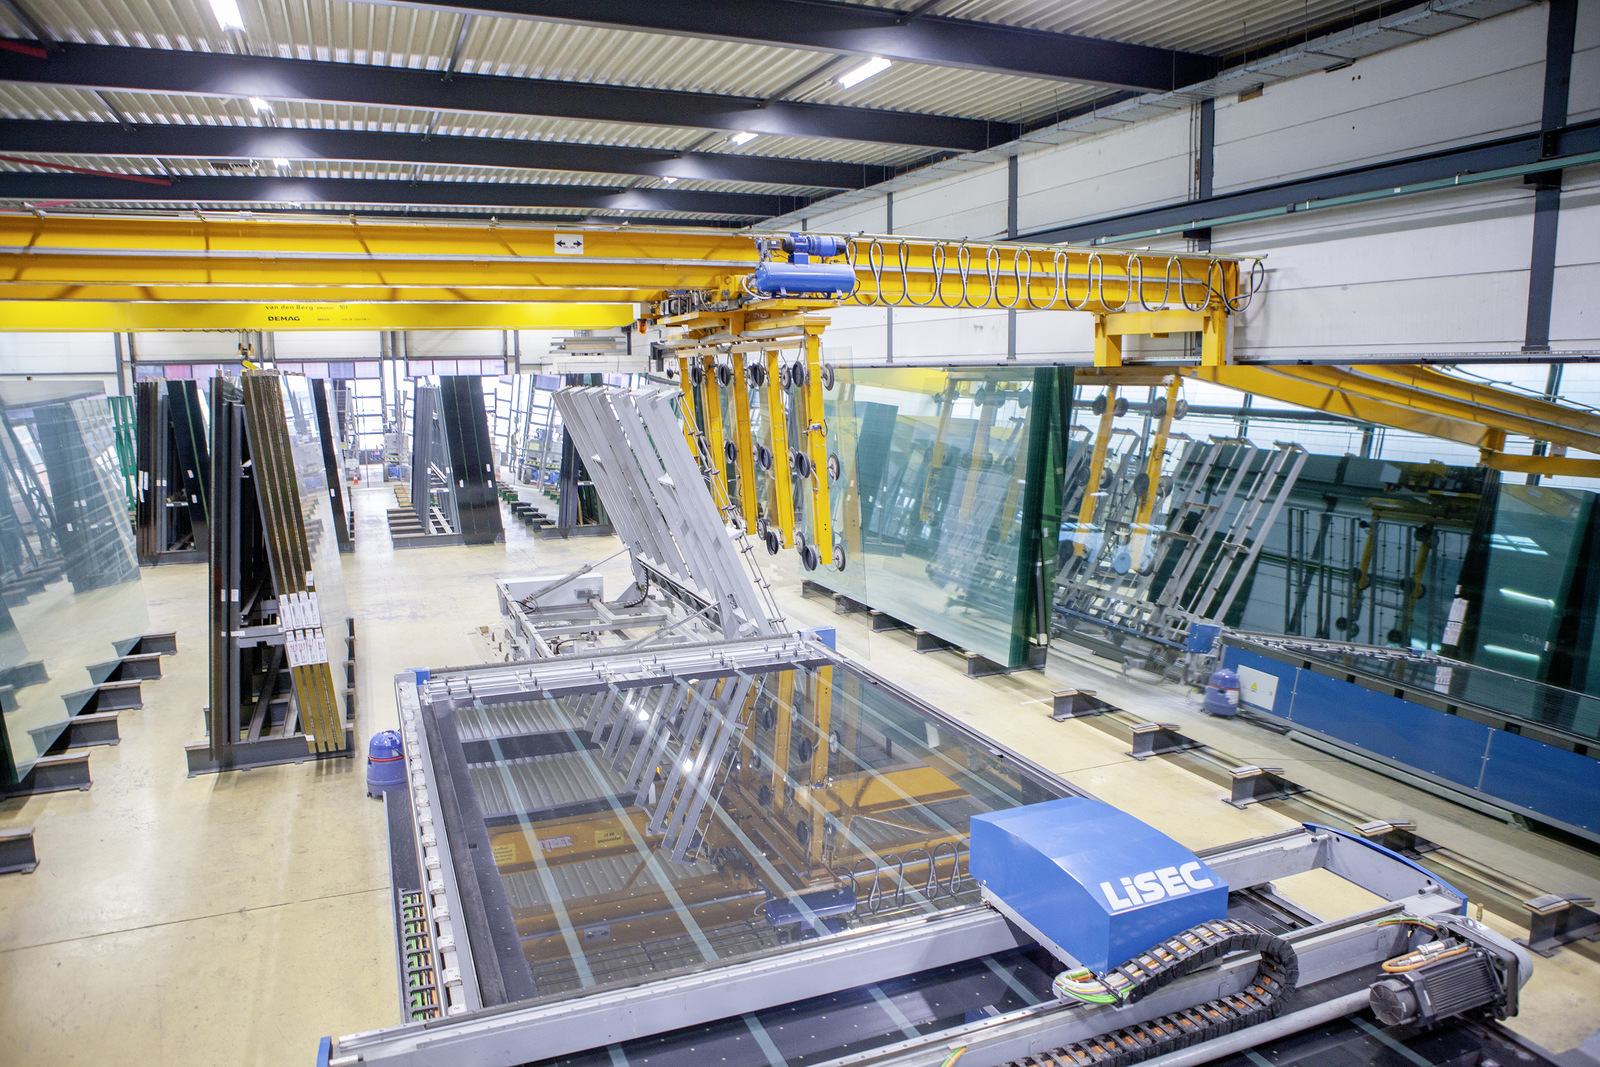 LiSEC: How the design of the machine affects the glass cutting of